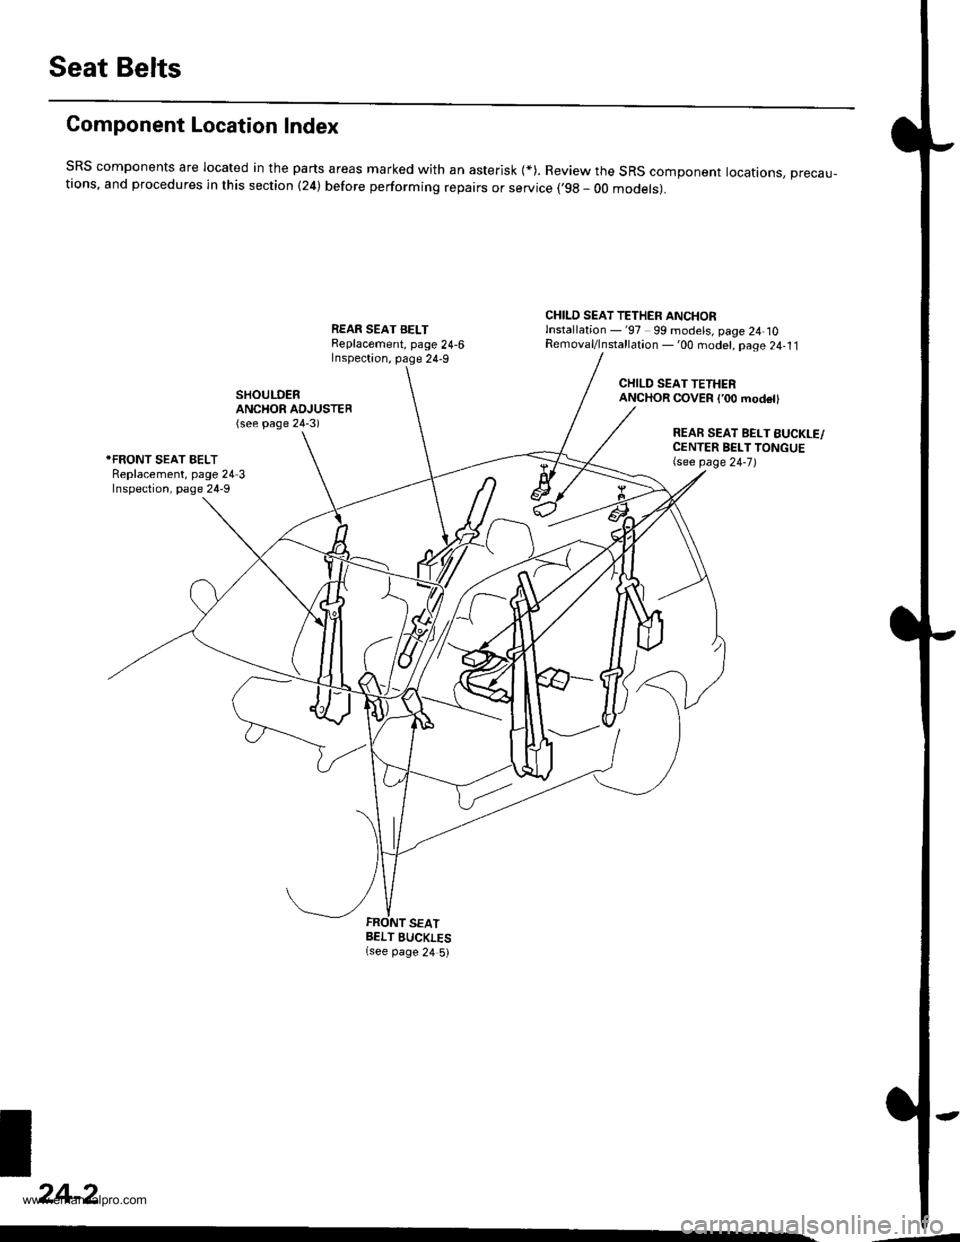 HONDA CR-V 1999 RD1-RD3 / 1.G Workshop Manual 
Seat Belts
Component Location Index
SRS components are located in the parts areas marked with an asterisk {*). Review the SRS component locauons, precau-tions, and procedures in this section (24) bef